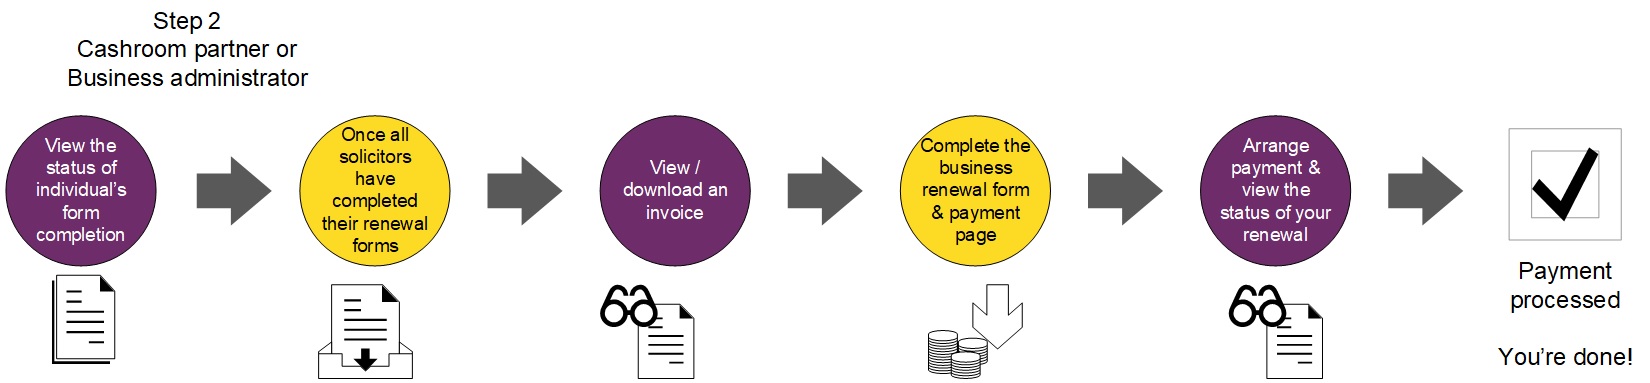 Online process 1. View status of individual's form completion 2. All solicitors complete renewal forms 3. View/download invoice 4. Complete business renewal form and payment page 5. Arrange payment and view status of renewal 6. Payment processed